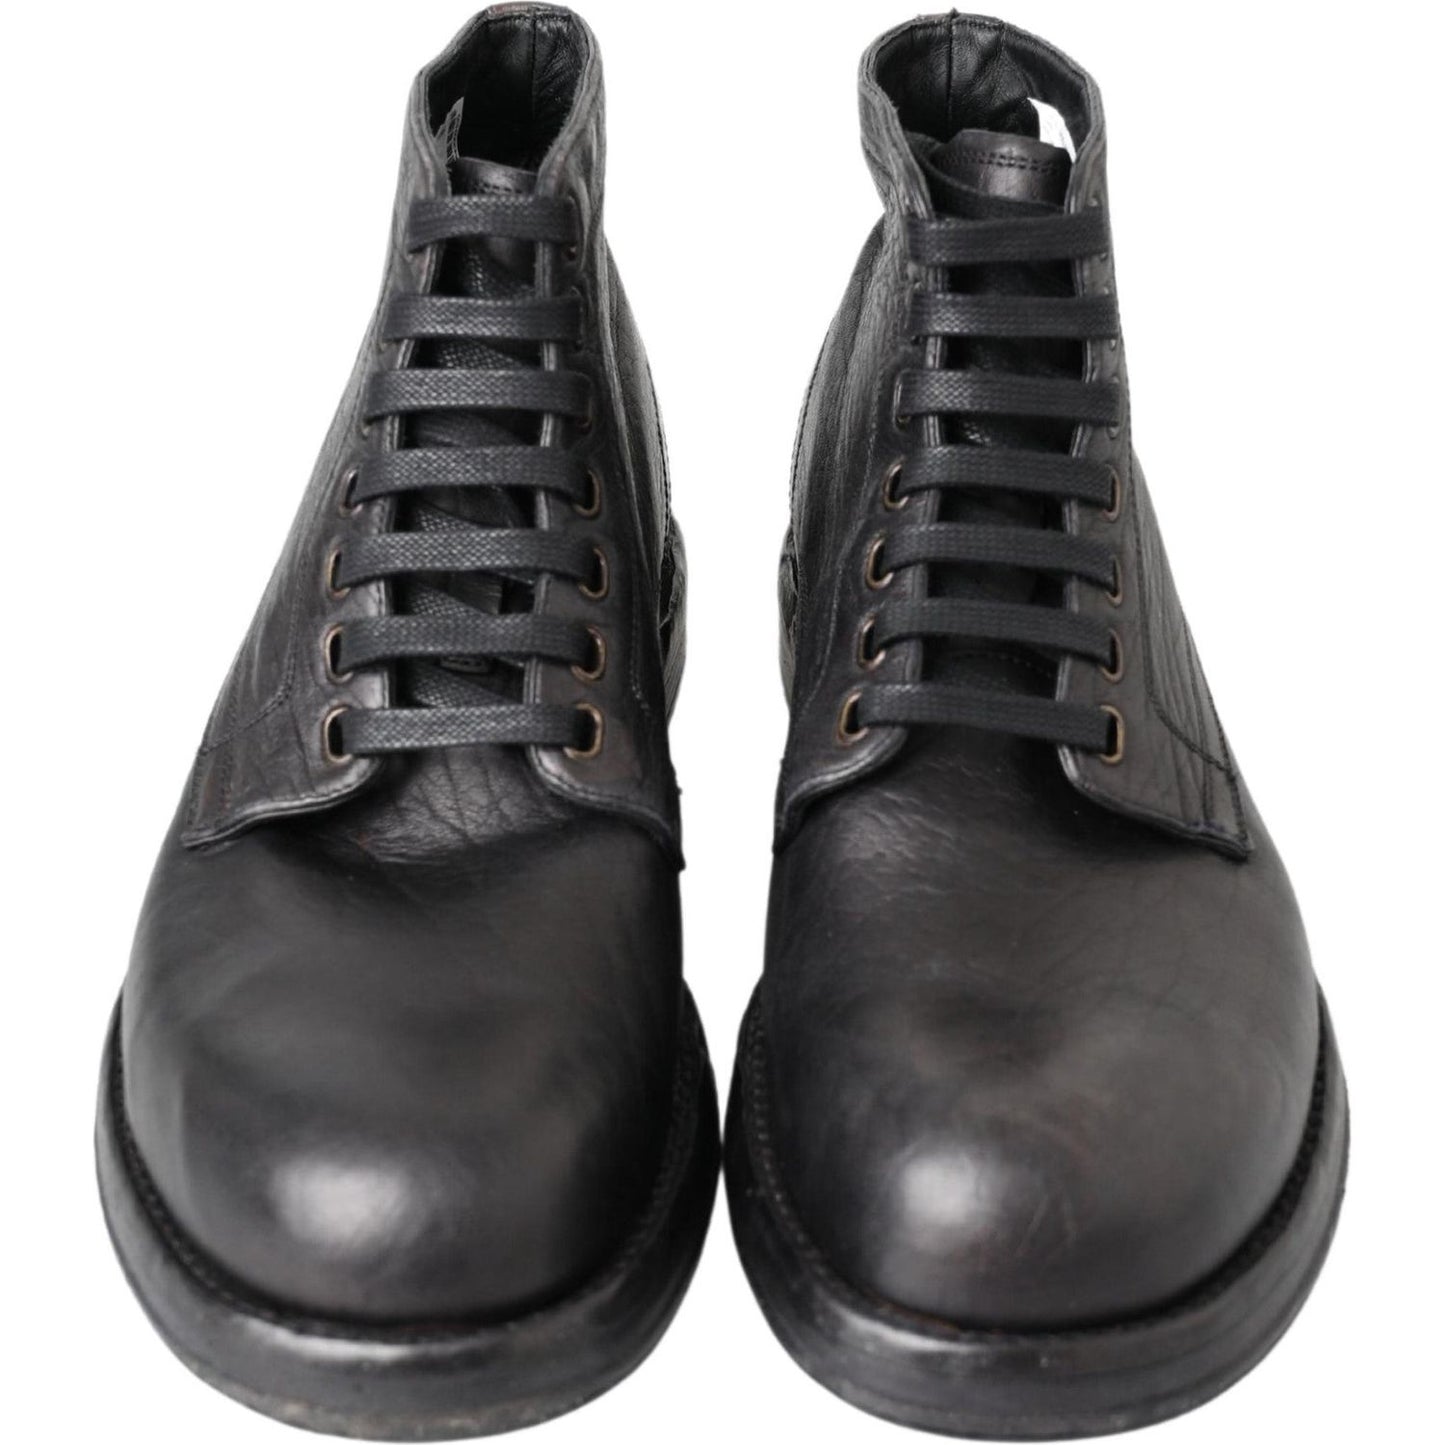 Dolce & Gabbana Equisite Black Lace-Up Leather Boots black-horse-leather-perugino-boots